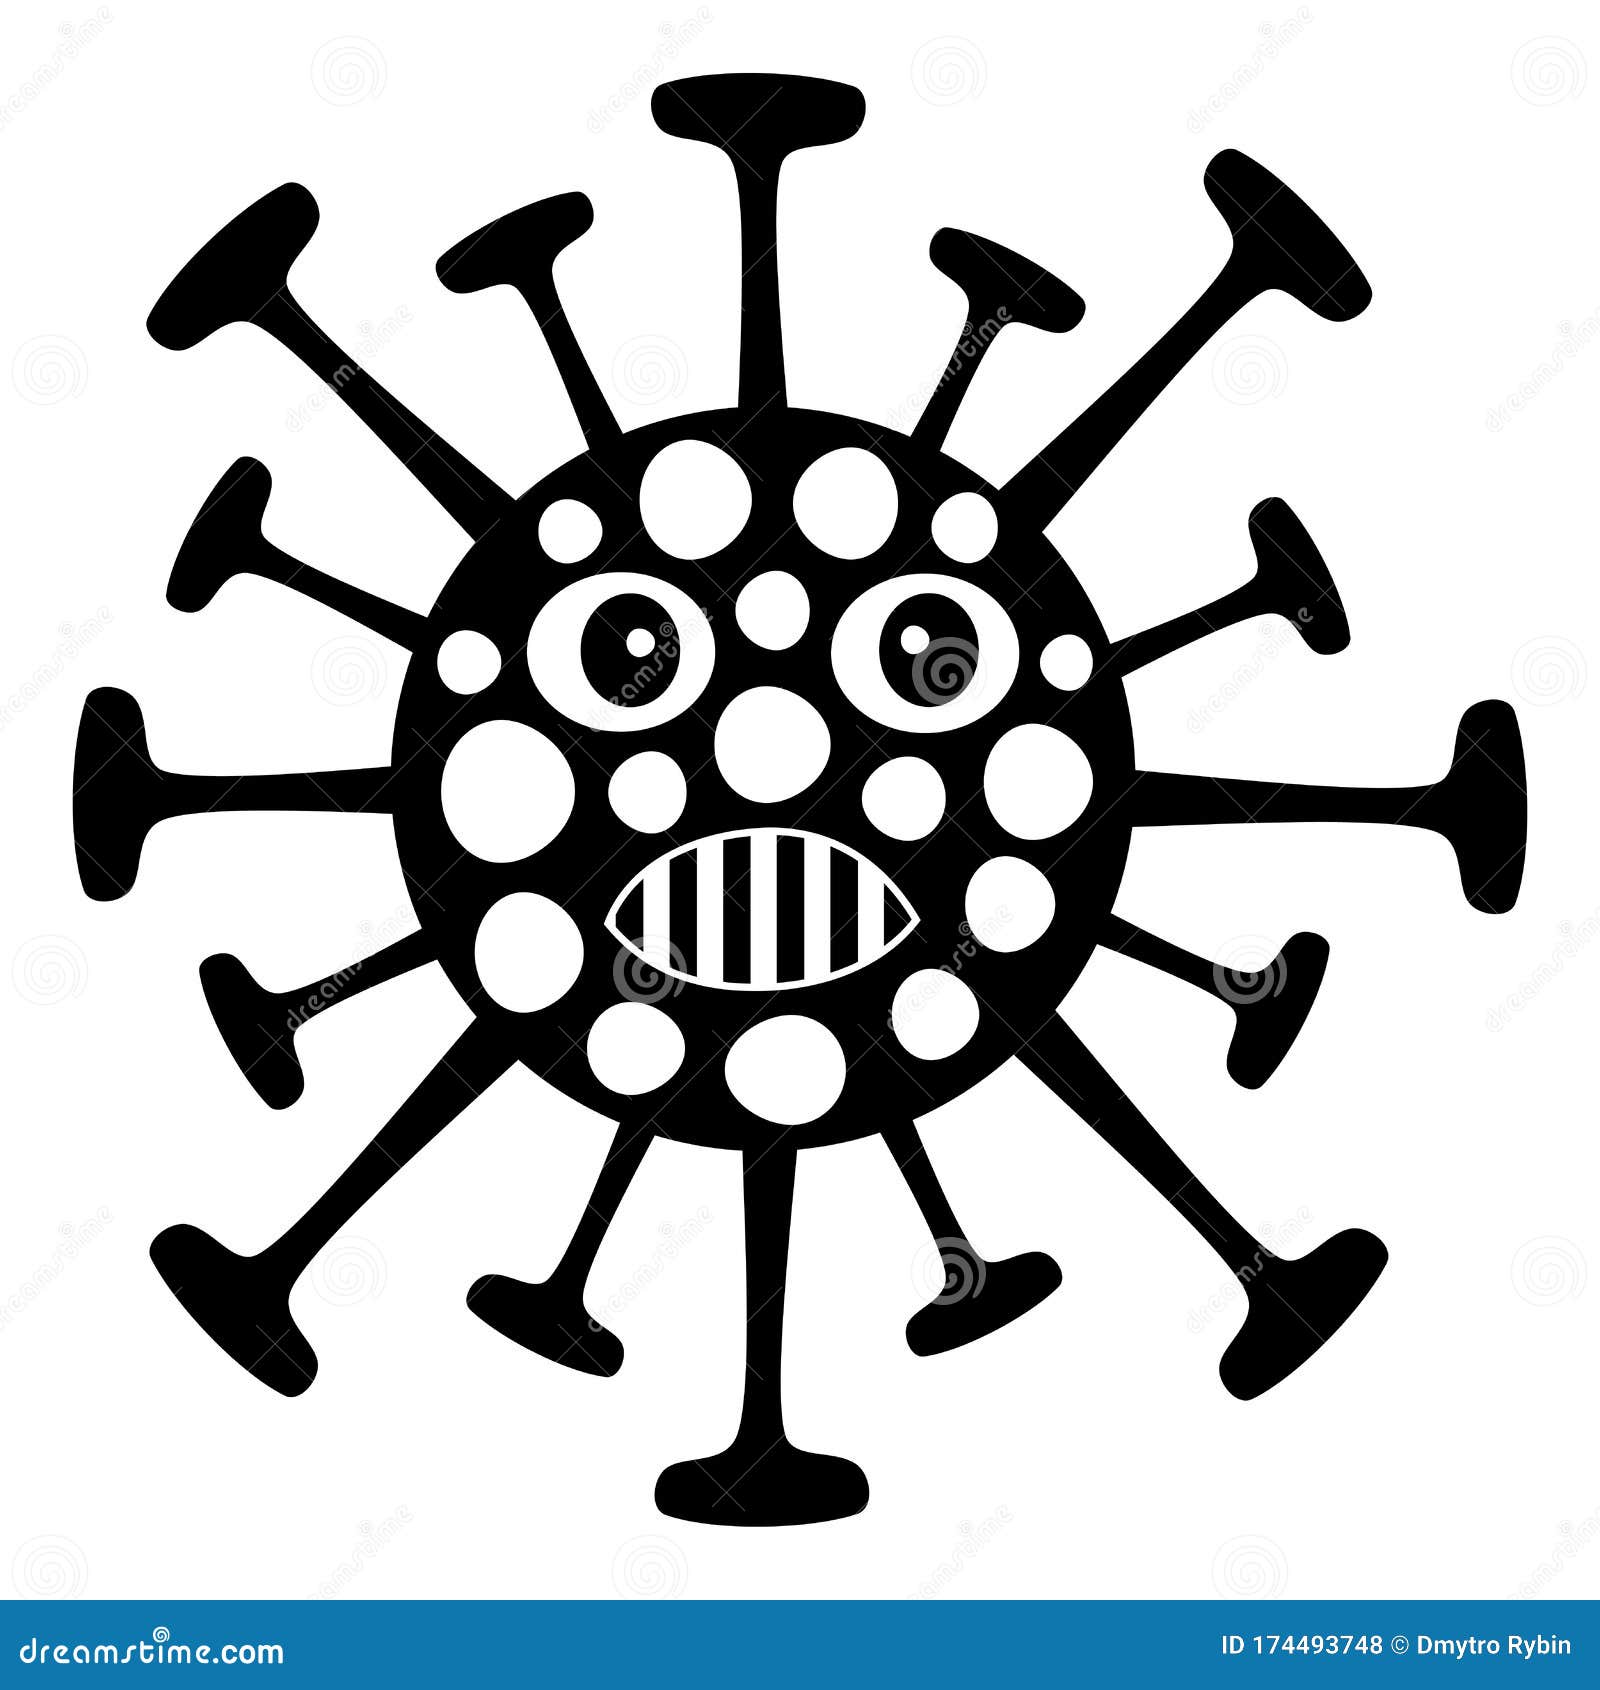 A Stylized Cartoon Image Of A Coronavirus With Face Teeth And Eyes